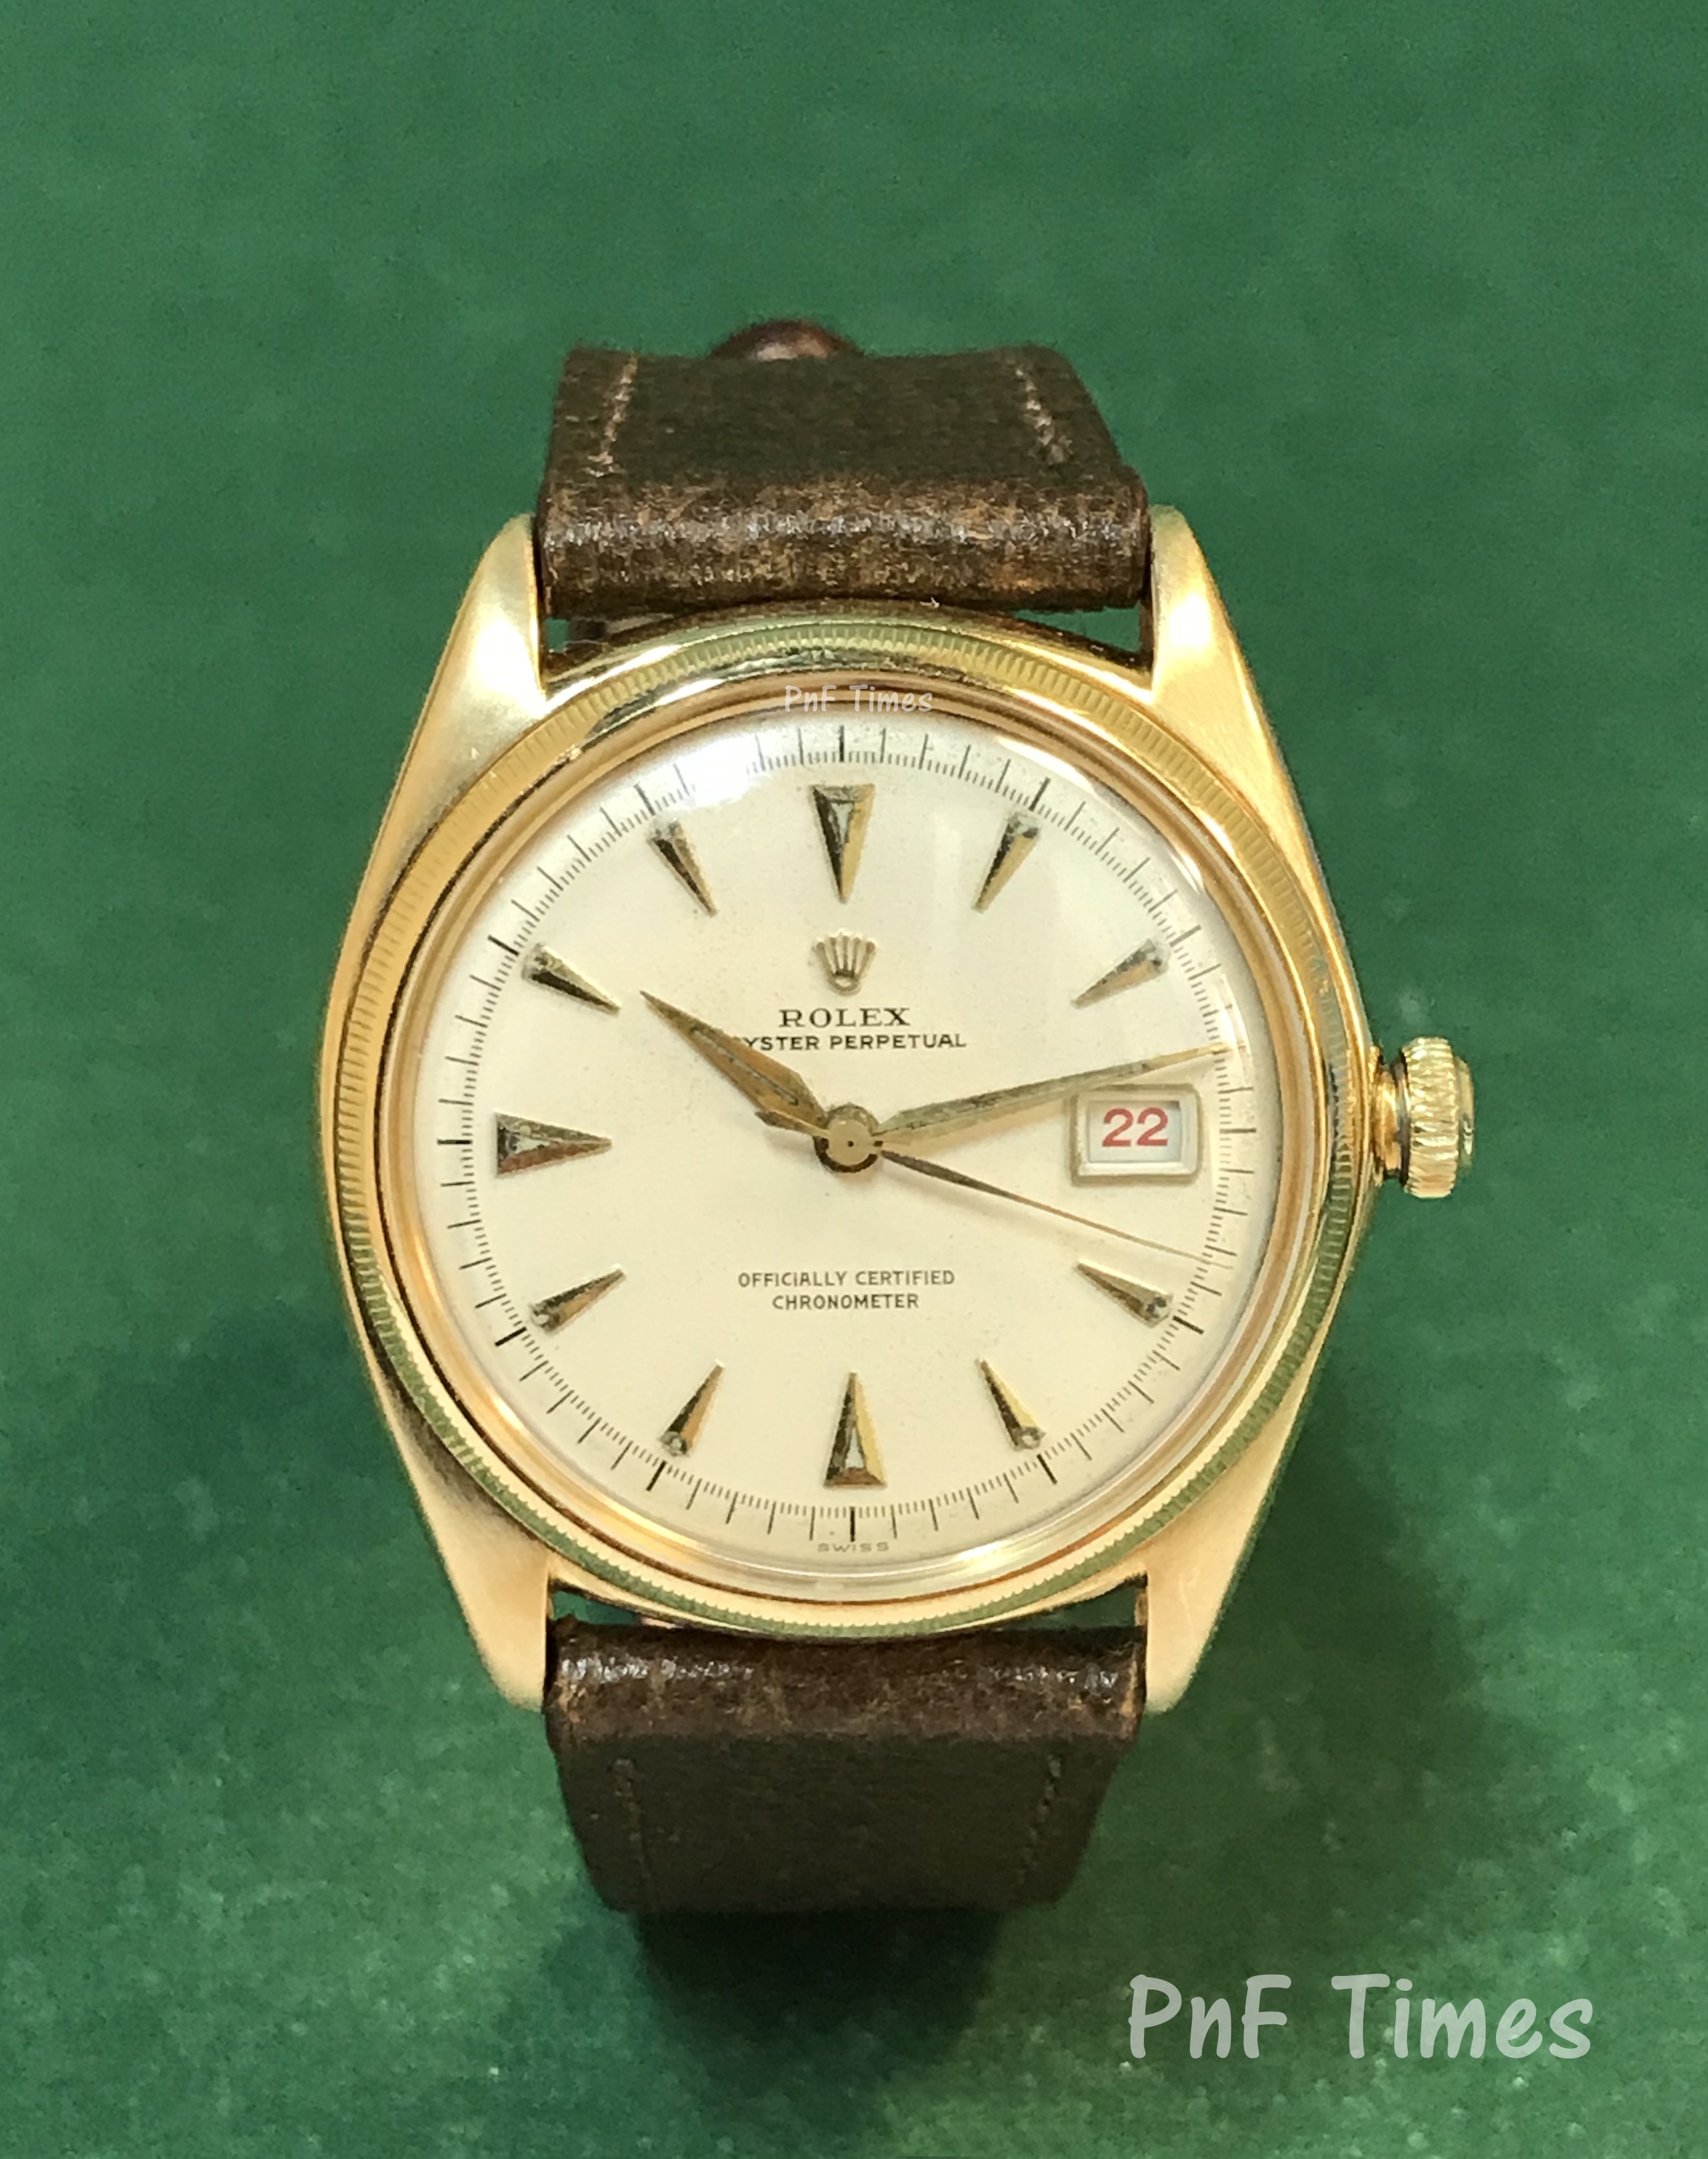 Rolex 4467 Oyster Perpetual 18k YG Back White Dial Leather Strap PnF Times